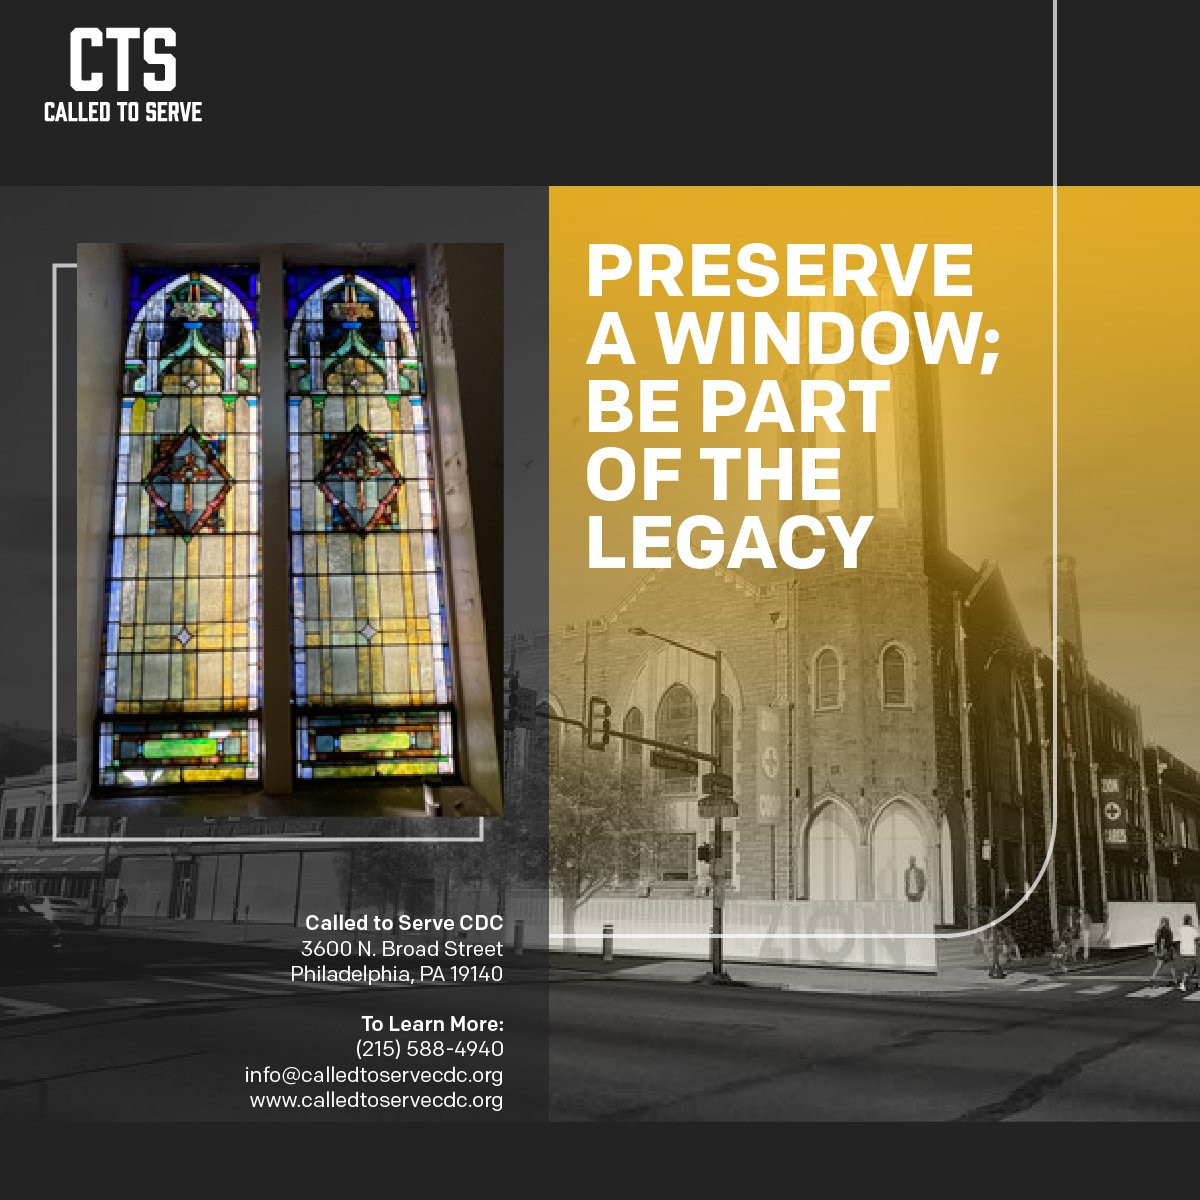 Be part of the legacy being set forth within the Rev. Leon H. Sullivan Community Impact Center development project! There are two windows above the doors on Venango Street you can preserve with a gift of $1,250 for one of them. Make a gift today: secure.lglforms.com/form_engine/s/…